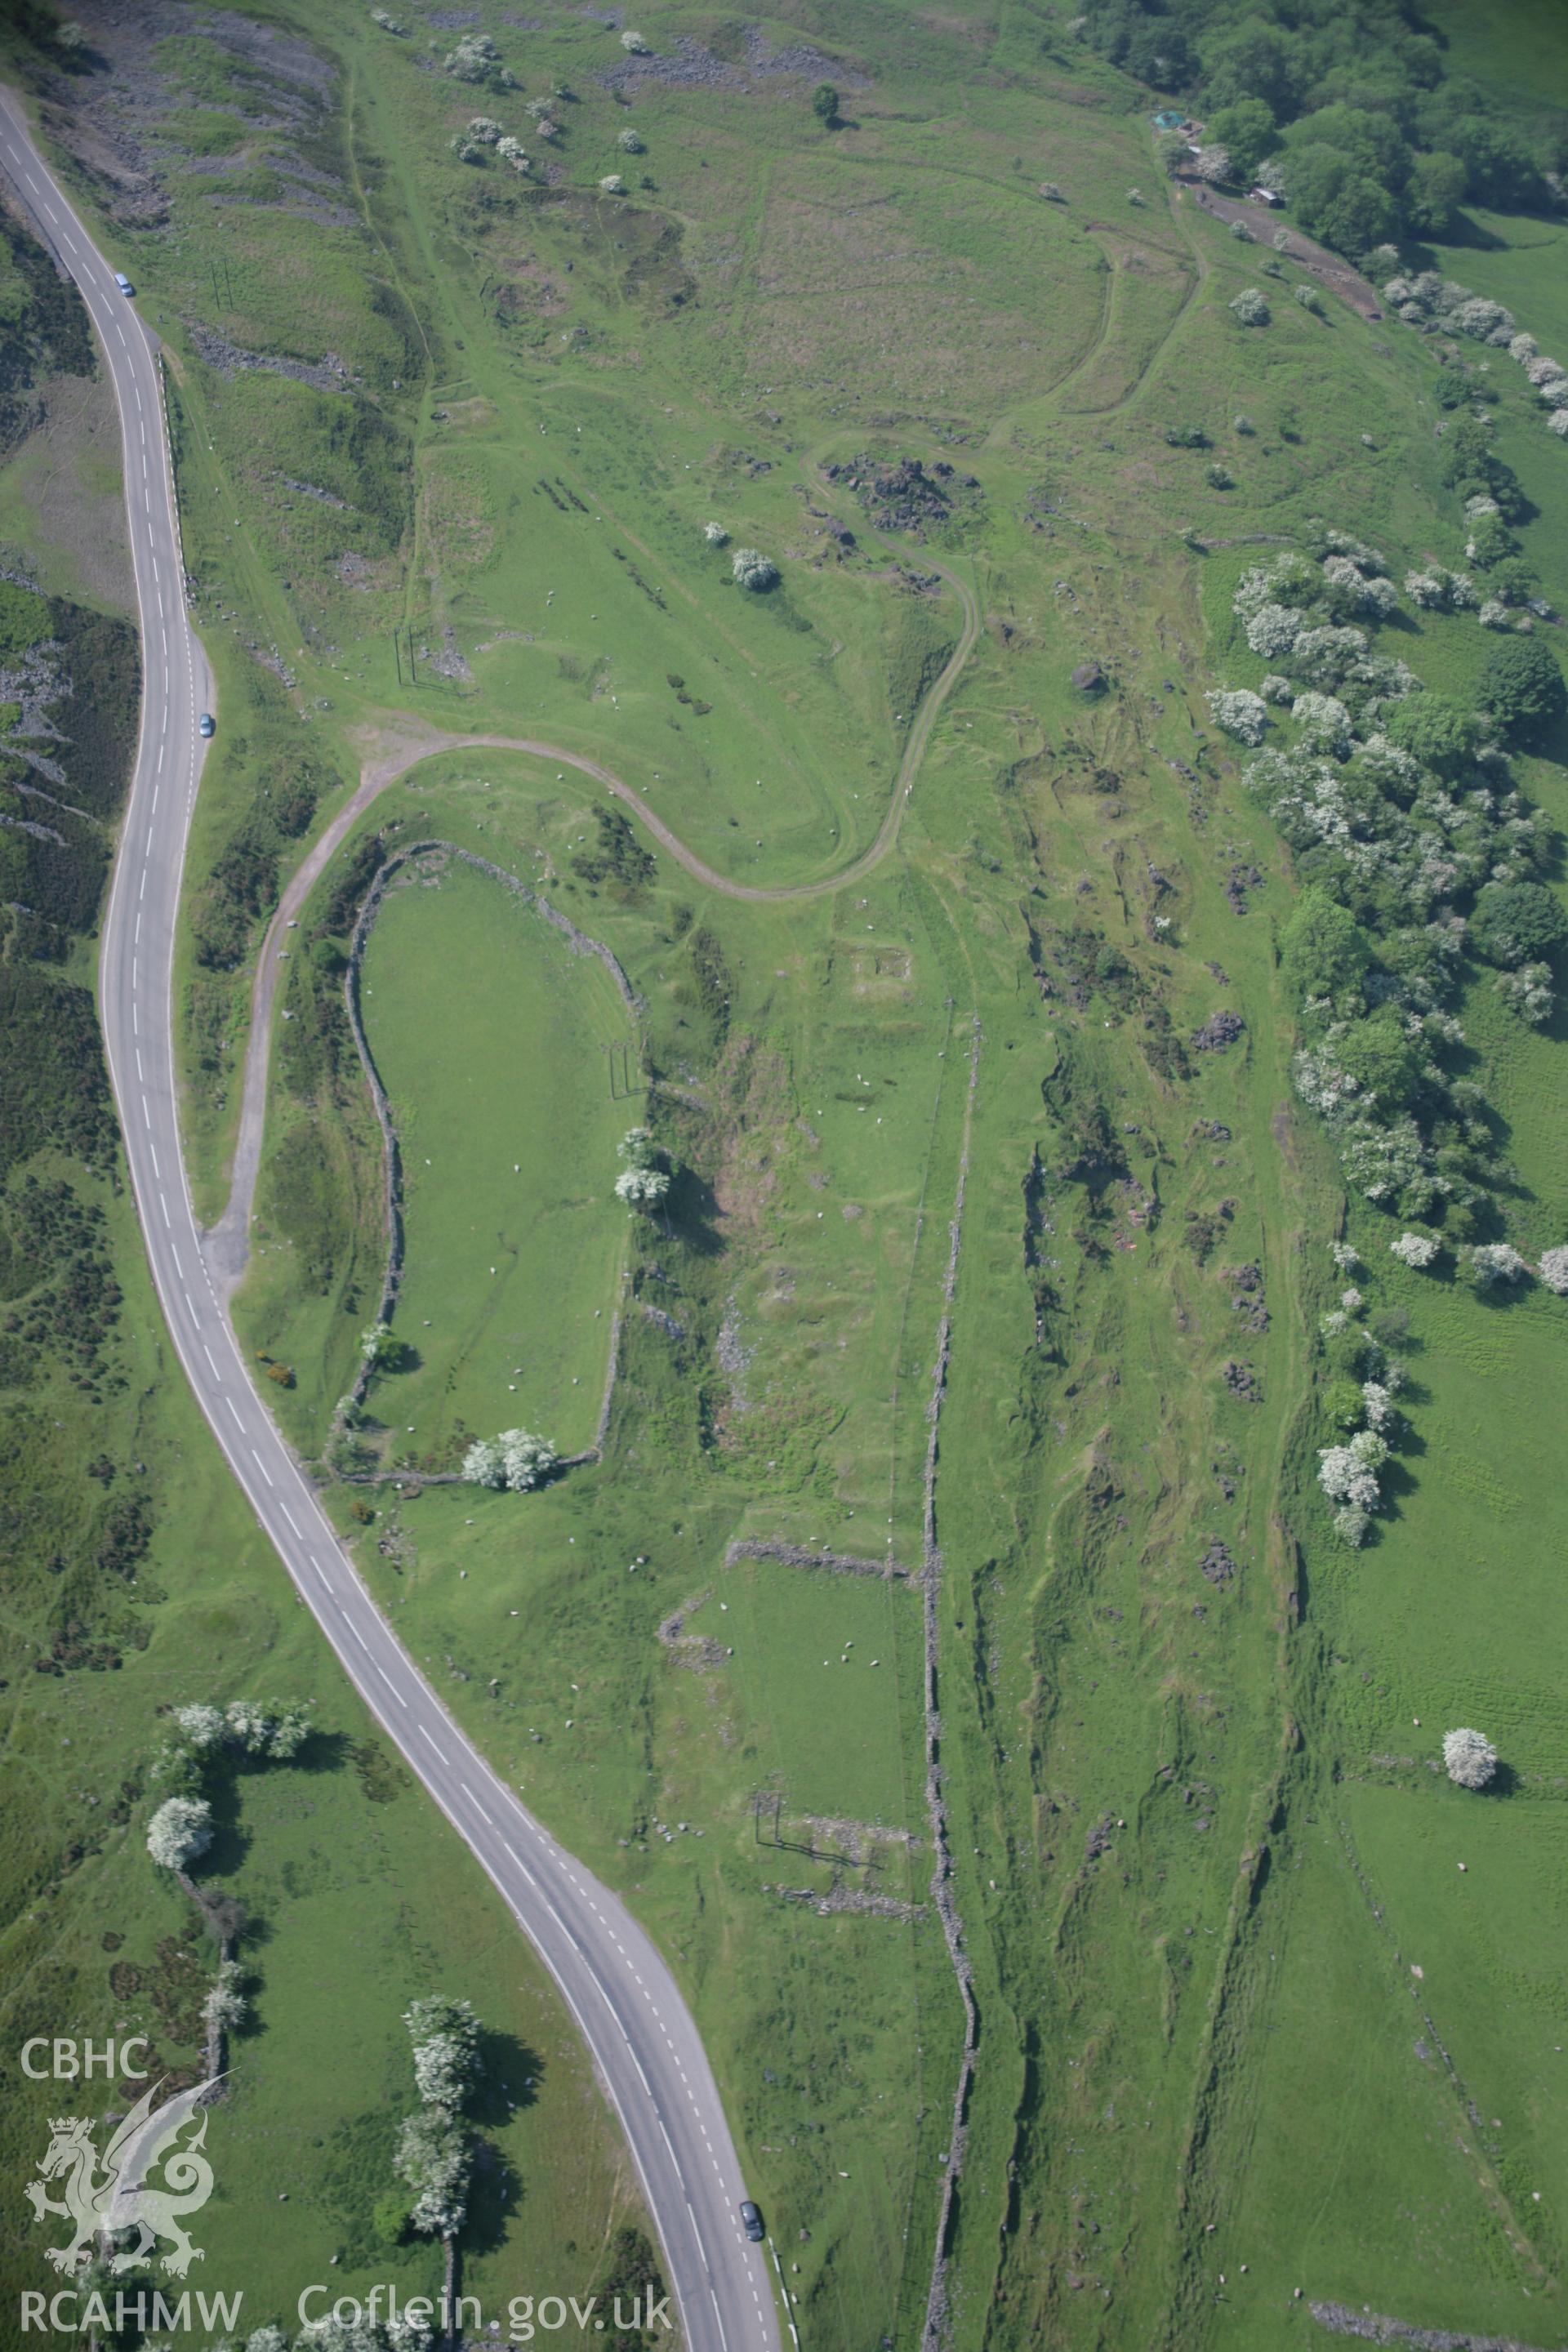 RCAHMW colour oblique aerial photograph of Garnddyrys Forge, on The Blorenge, from the north-east. Taken on 09 June 2006 by Toby Driver.